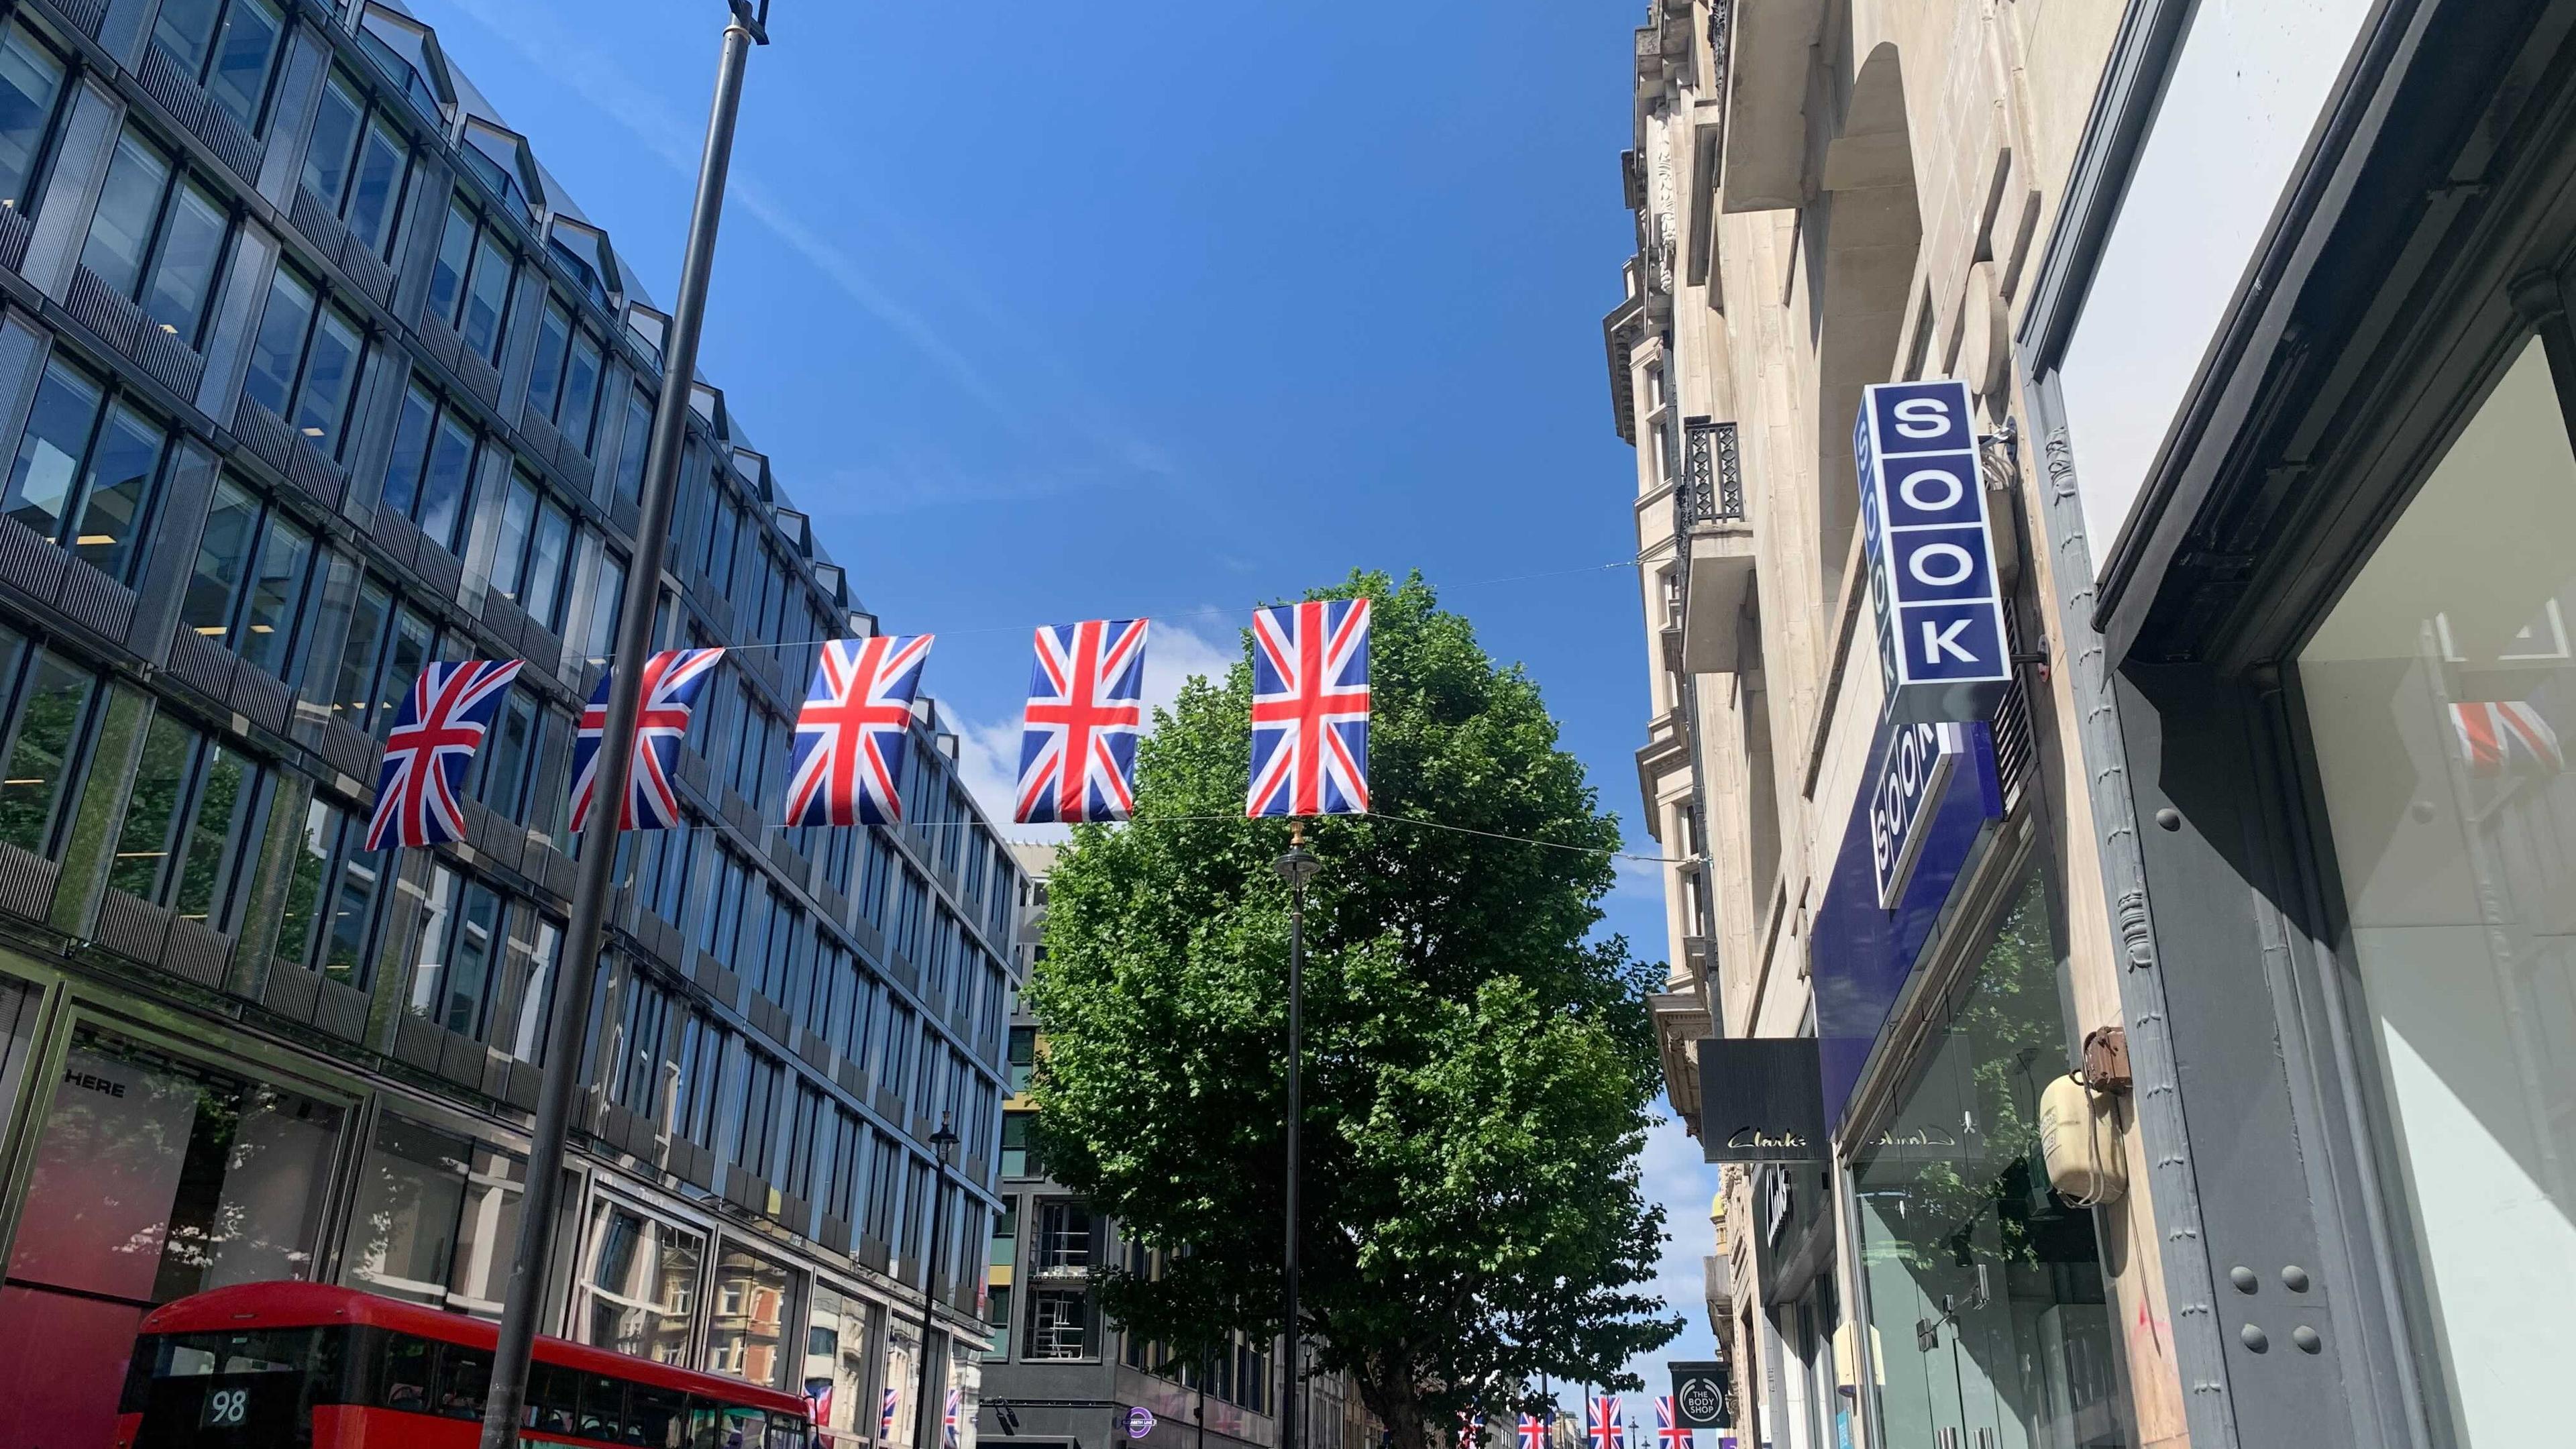 Blue sky above Sook store in Oxford Street with british flag bunting hanging across the street